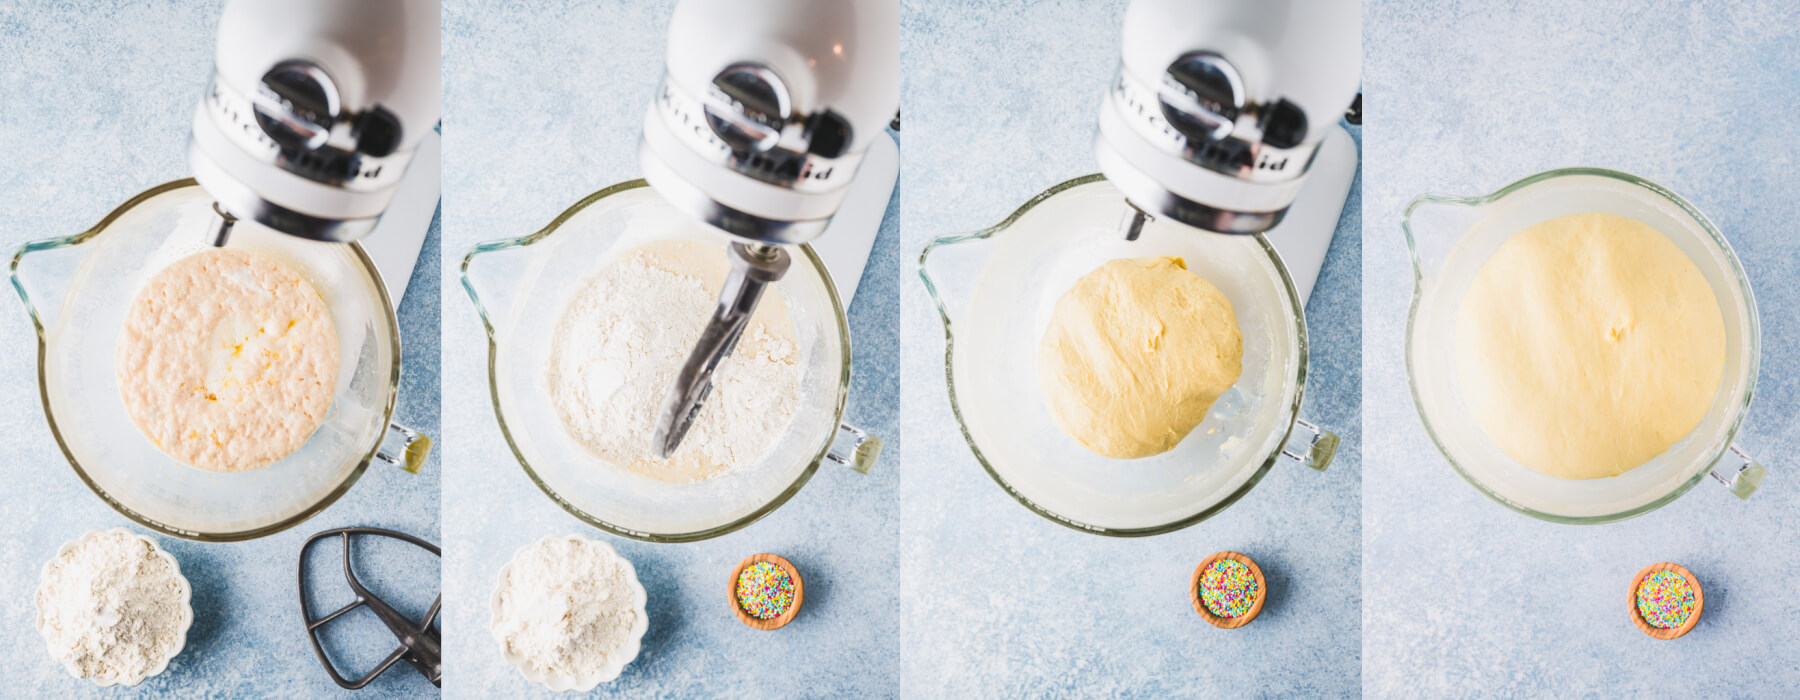 A series of process images showing how to mix and proof dough.